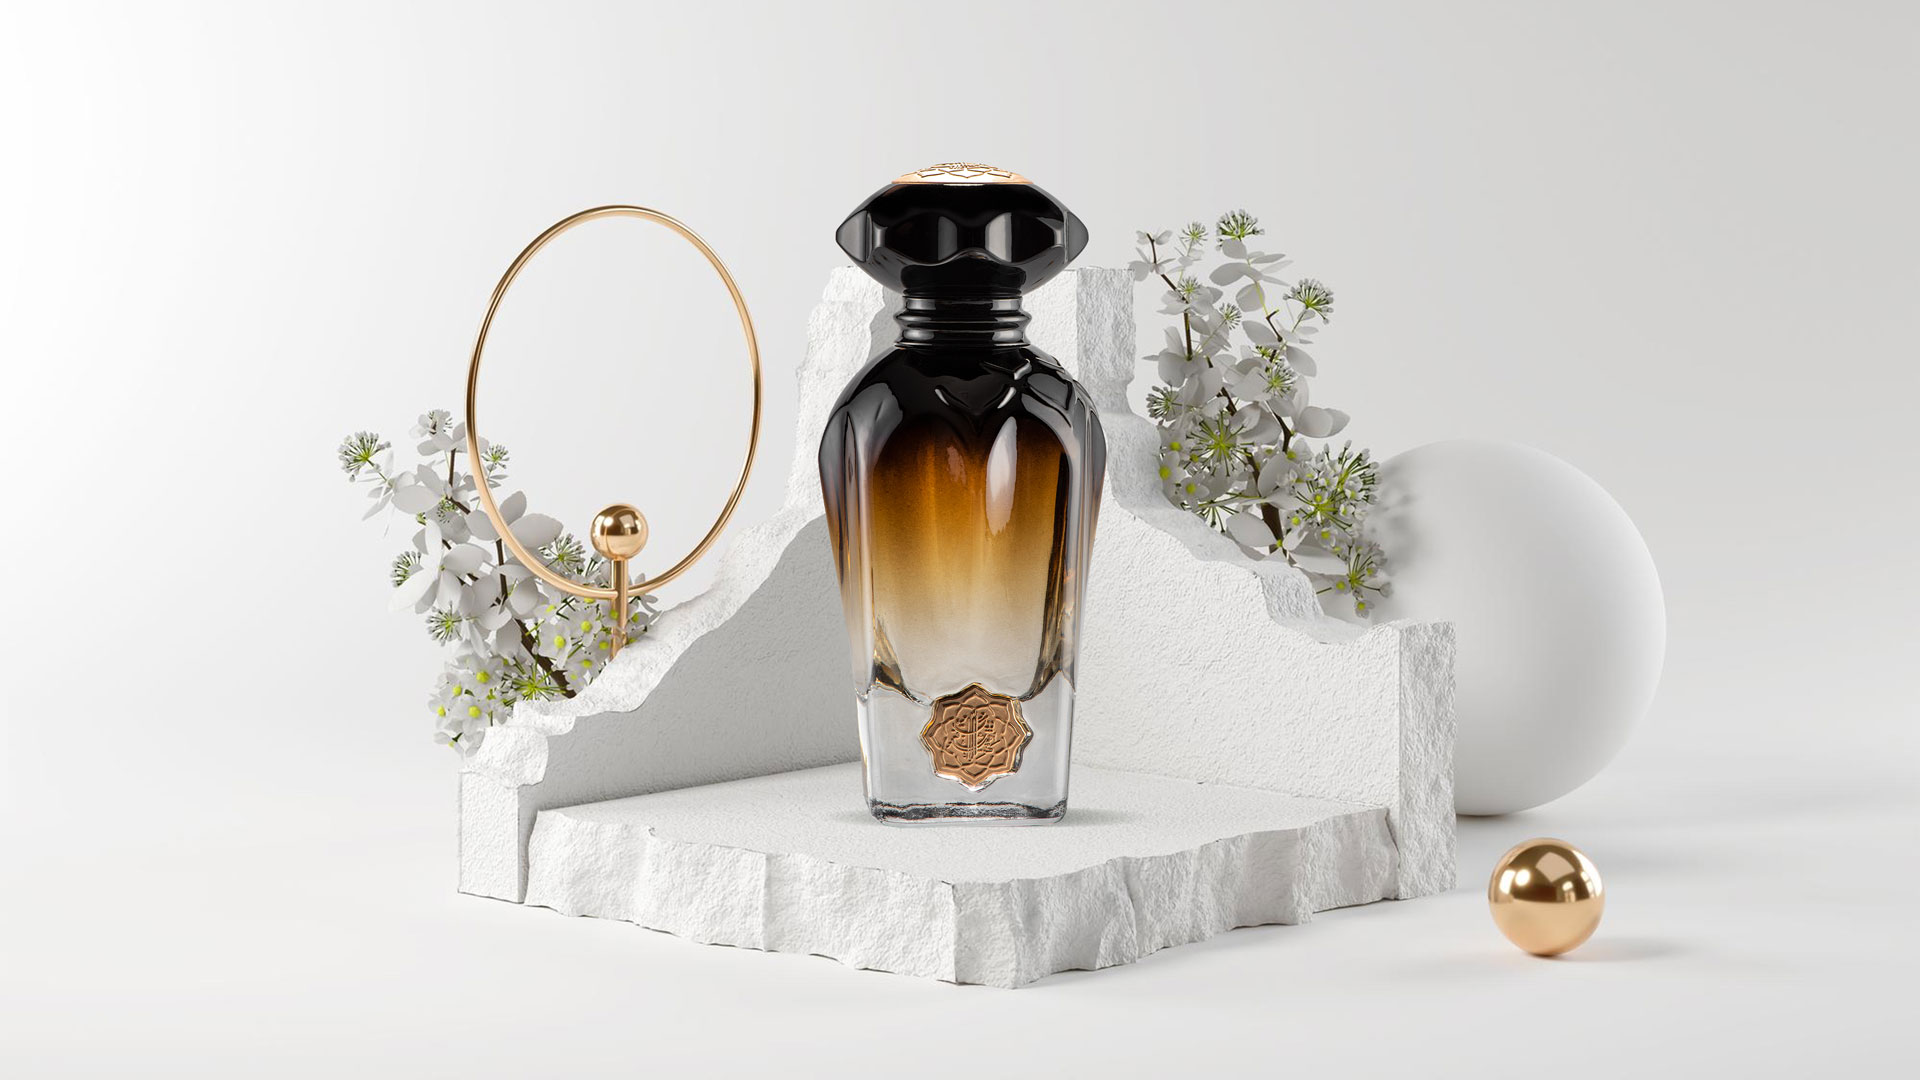 What Makes Paco Rabanne Perfumes Stand Out from the Competition?